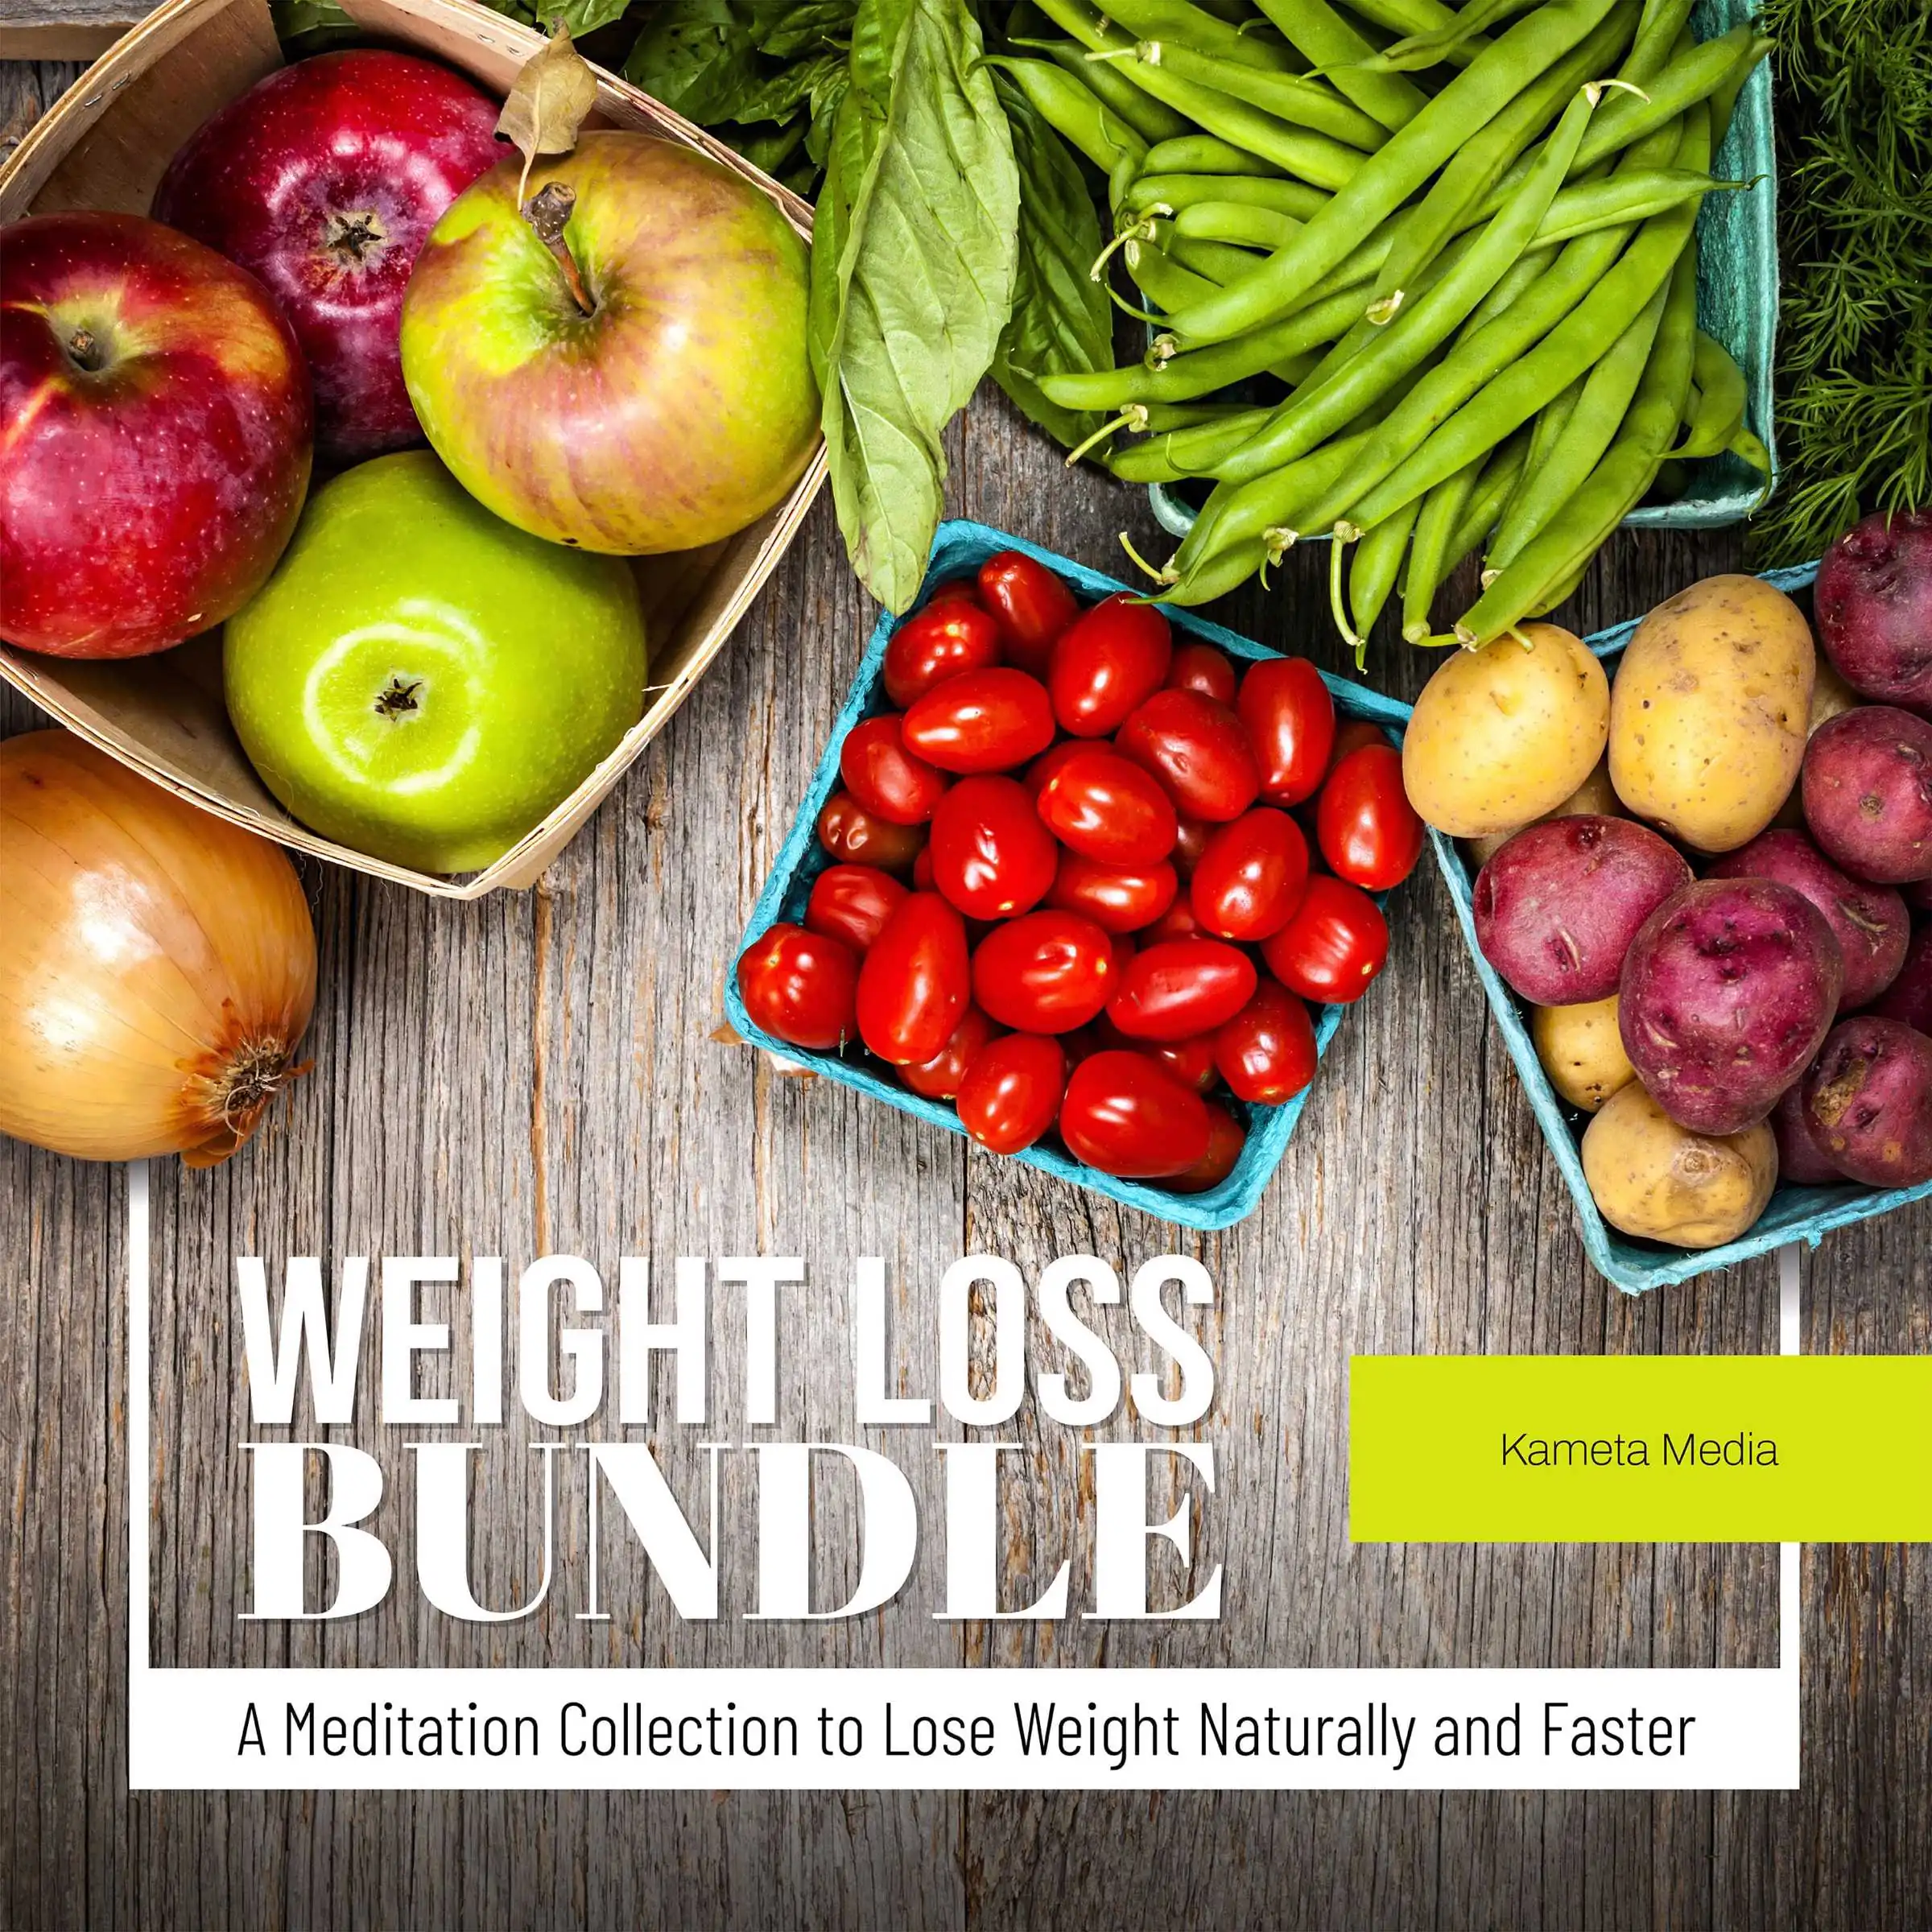 Weight Loss Bundle: A Meditation Collection to Lose Weight Naturally and Faster Audiobook by Kameta Media